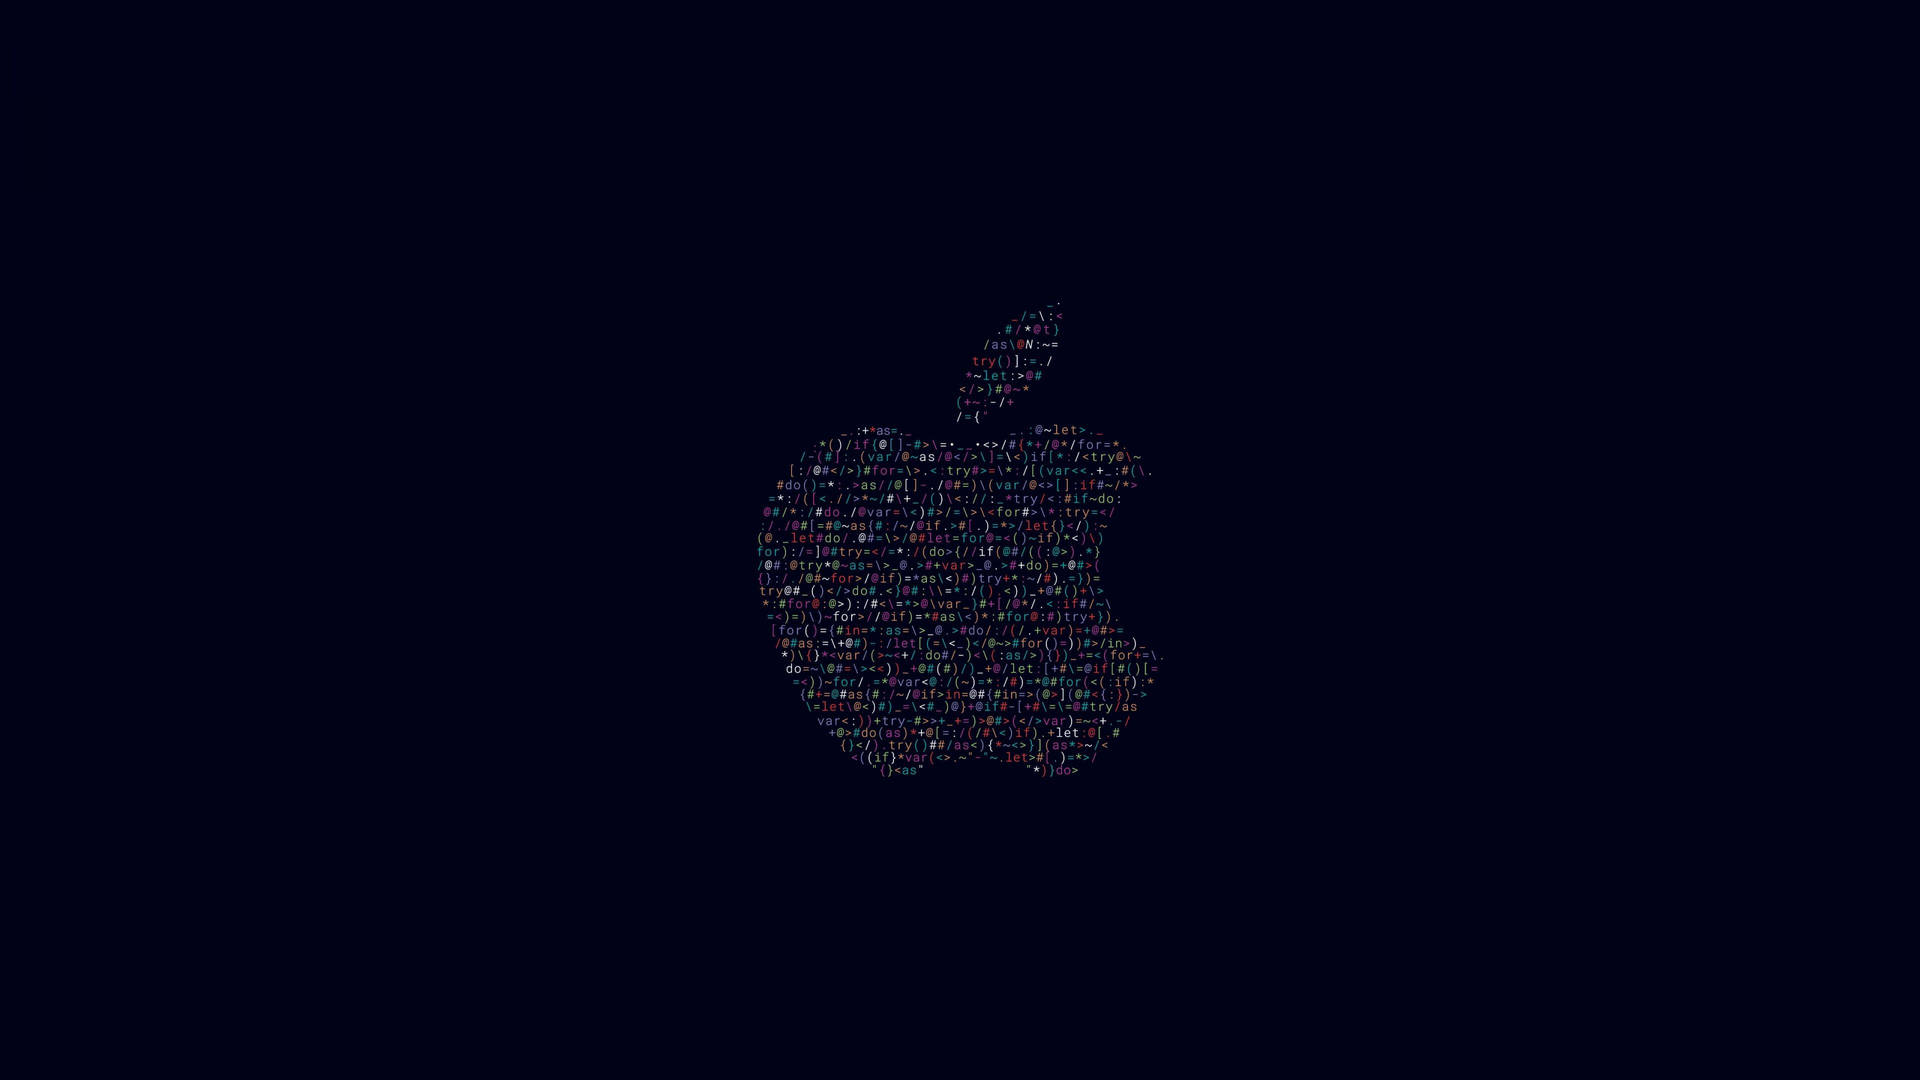 The iconic Apple logo illuminated with vibrant gradients. Wallpaper